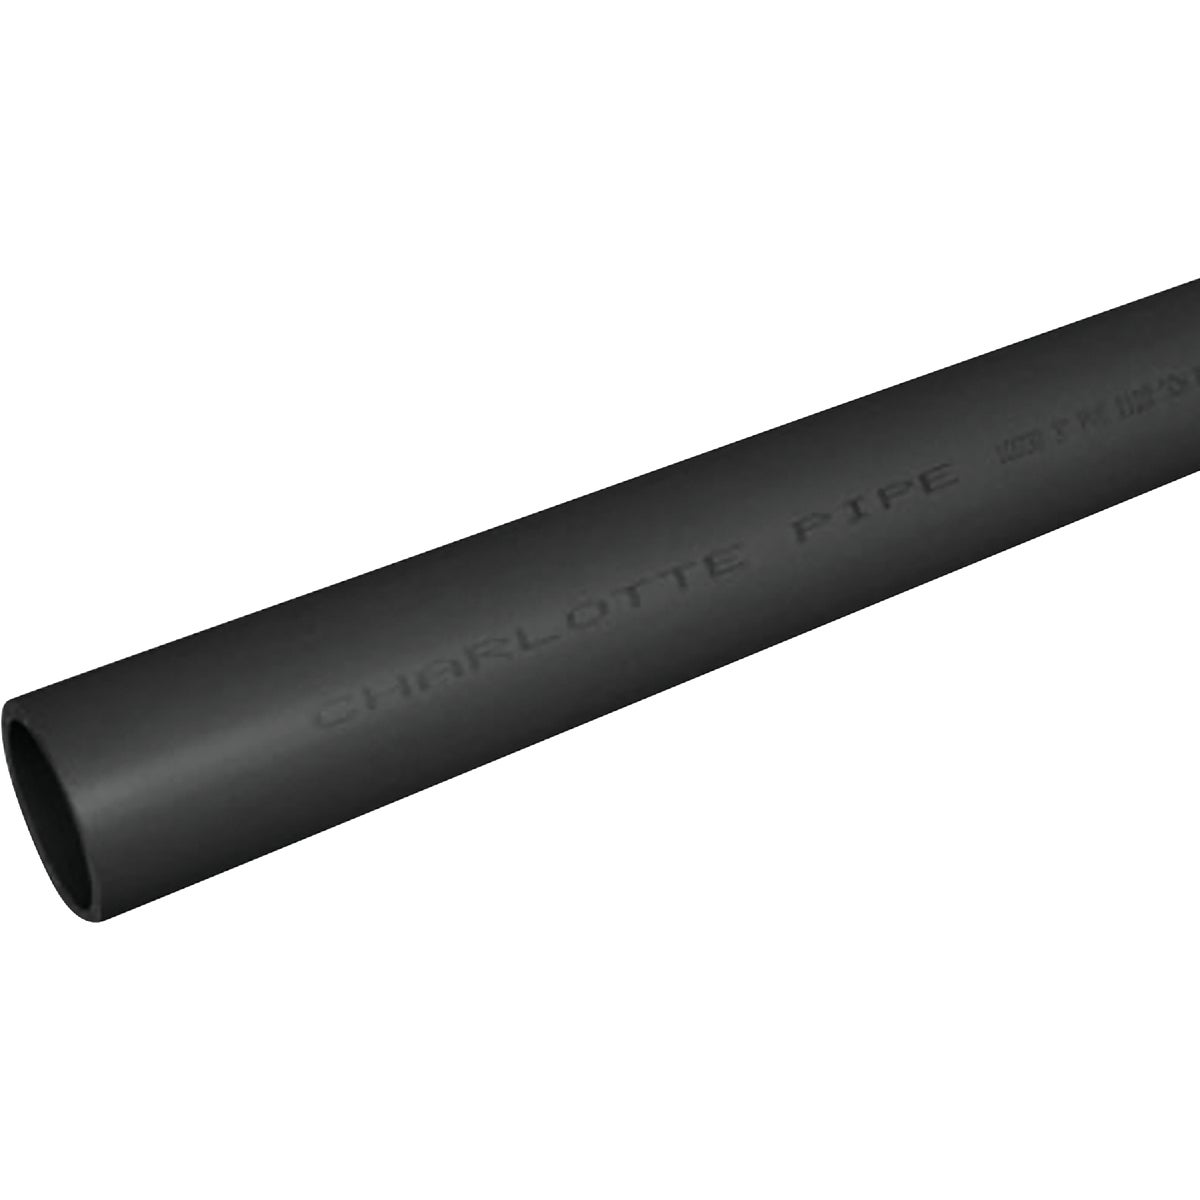 Item 462829, PVC schedule 80 plain end gray pipe is for pressure uses.